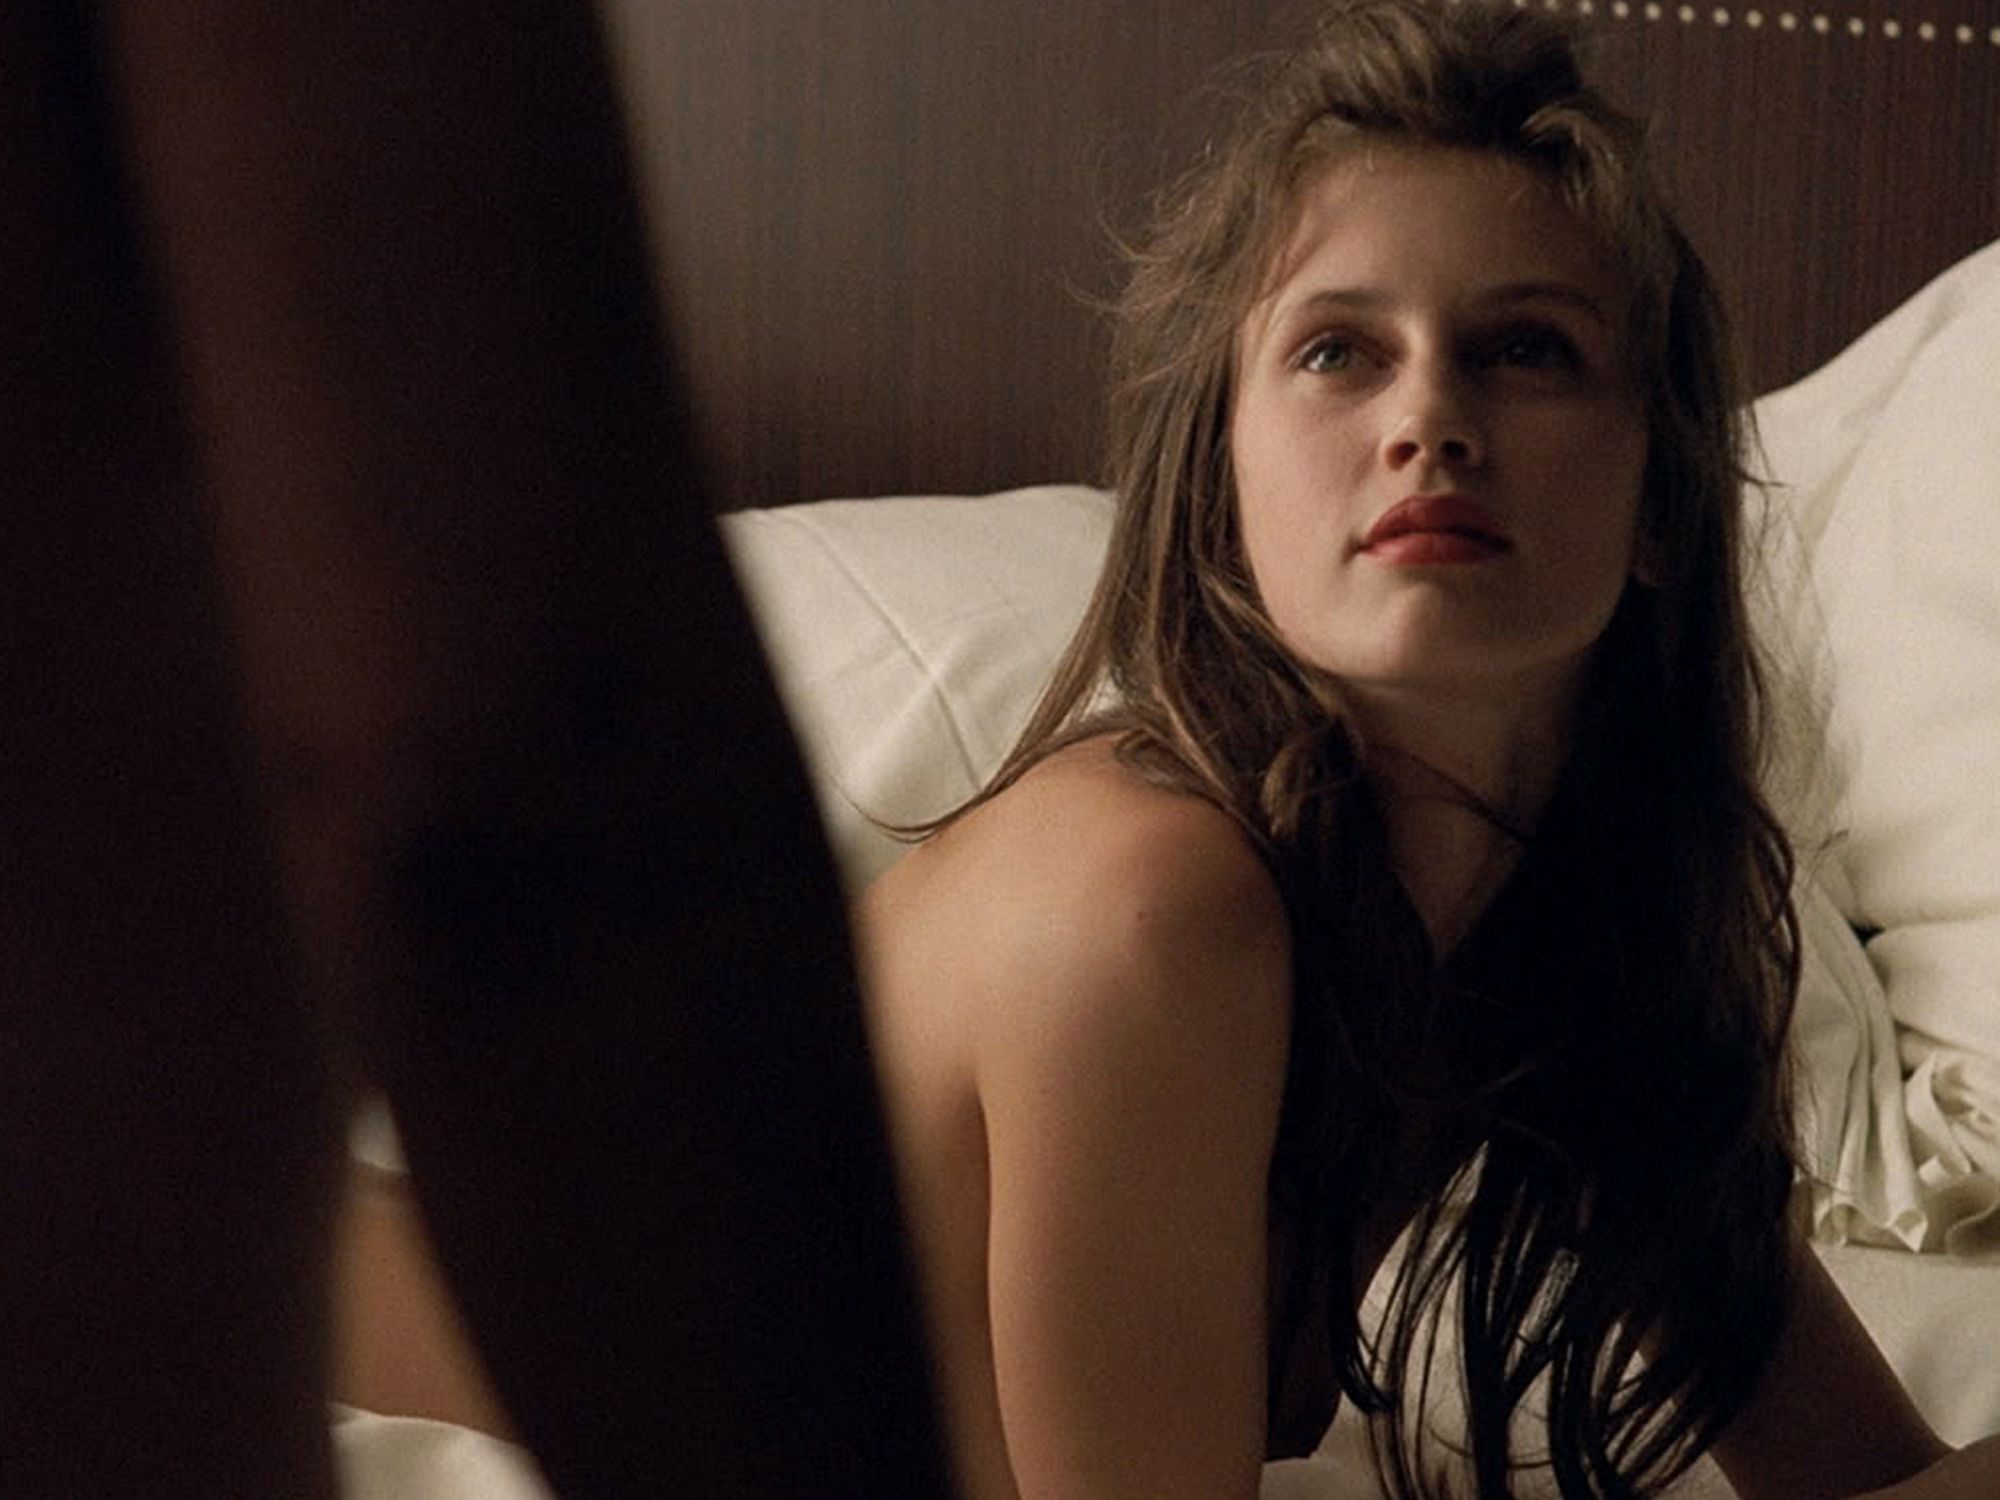 bruce magnan reccomend marine vacth topless pic